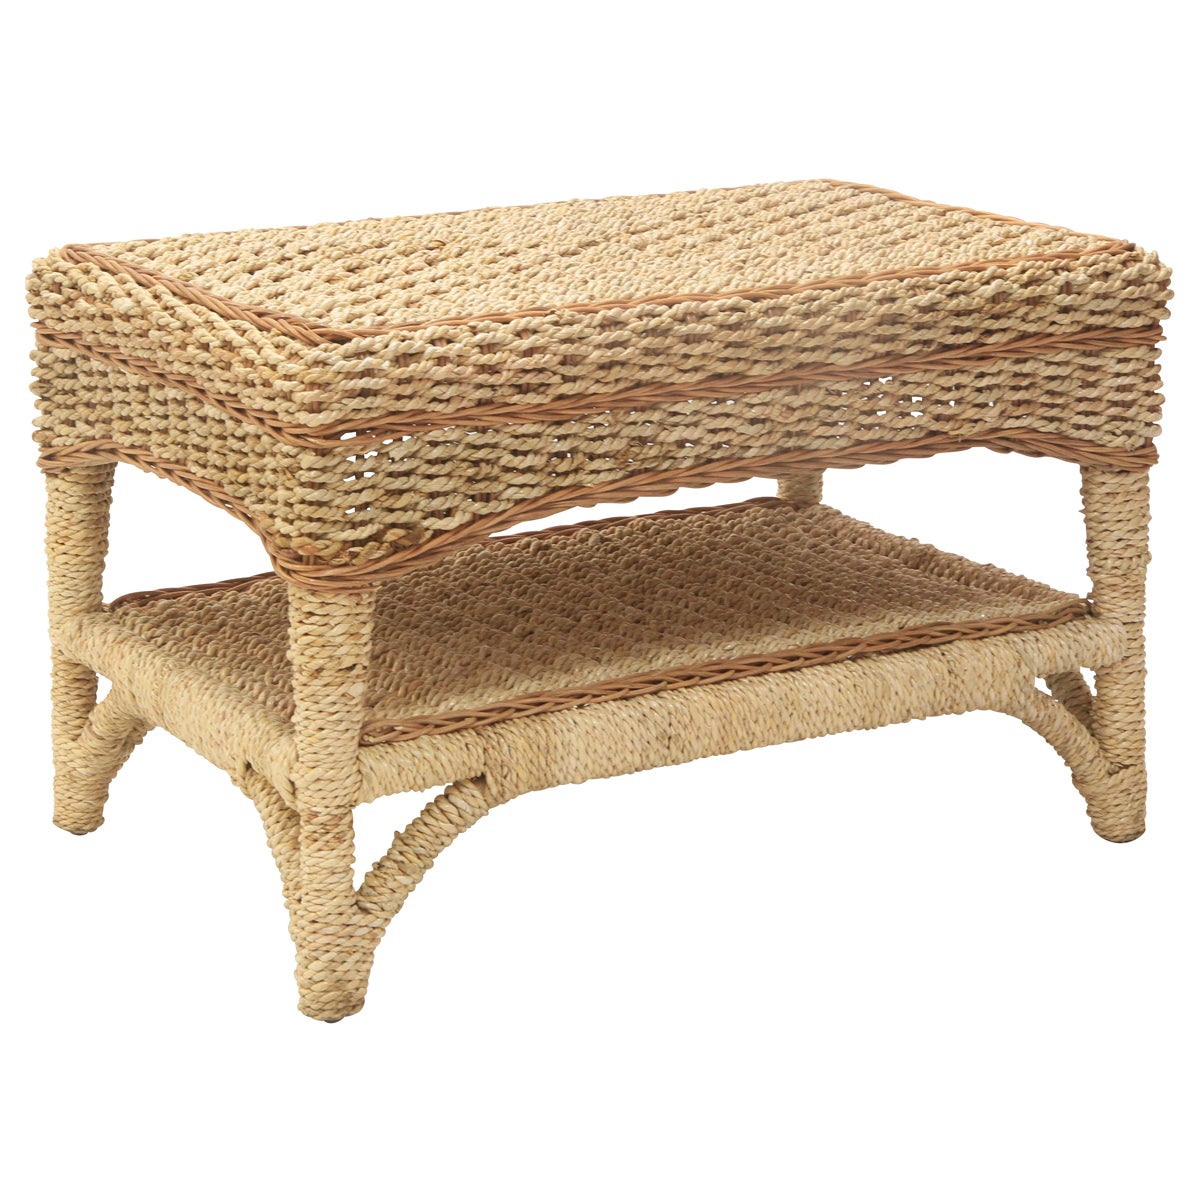 Kensington Cane/Rattan Coffee Table in Natural Seagrass